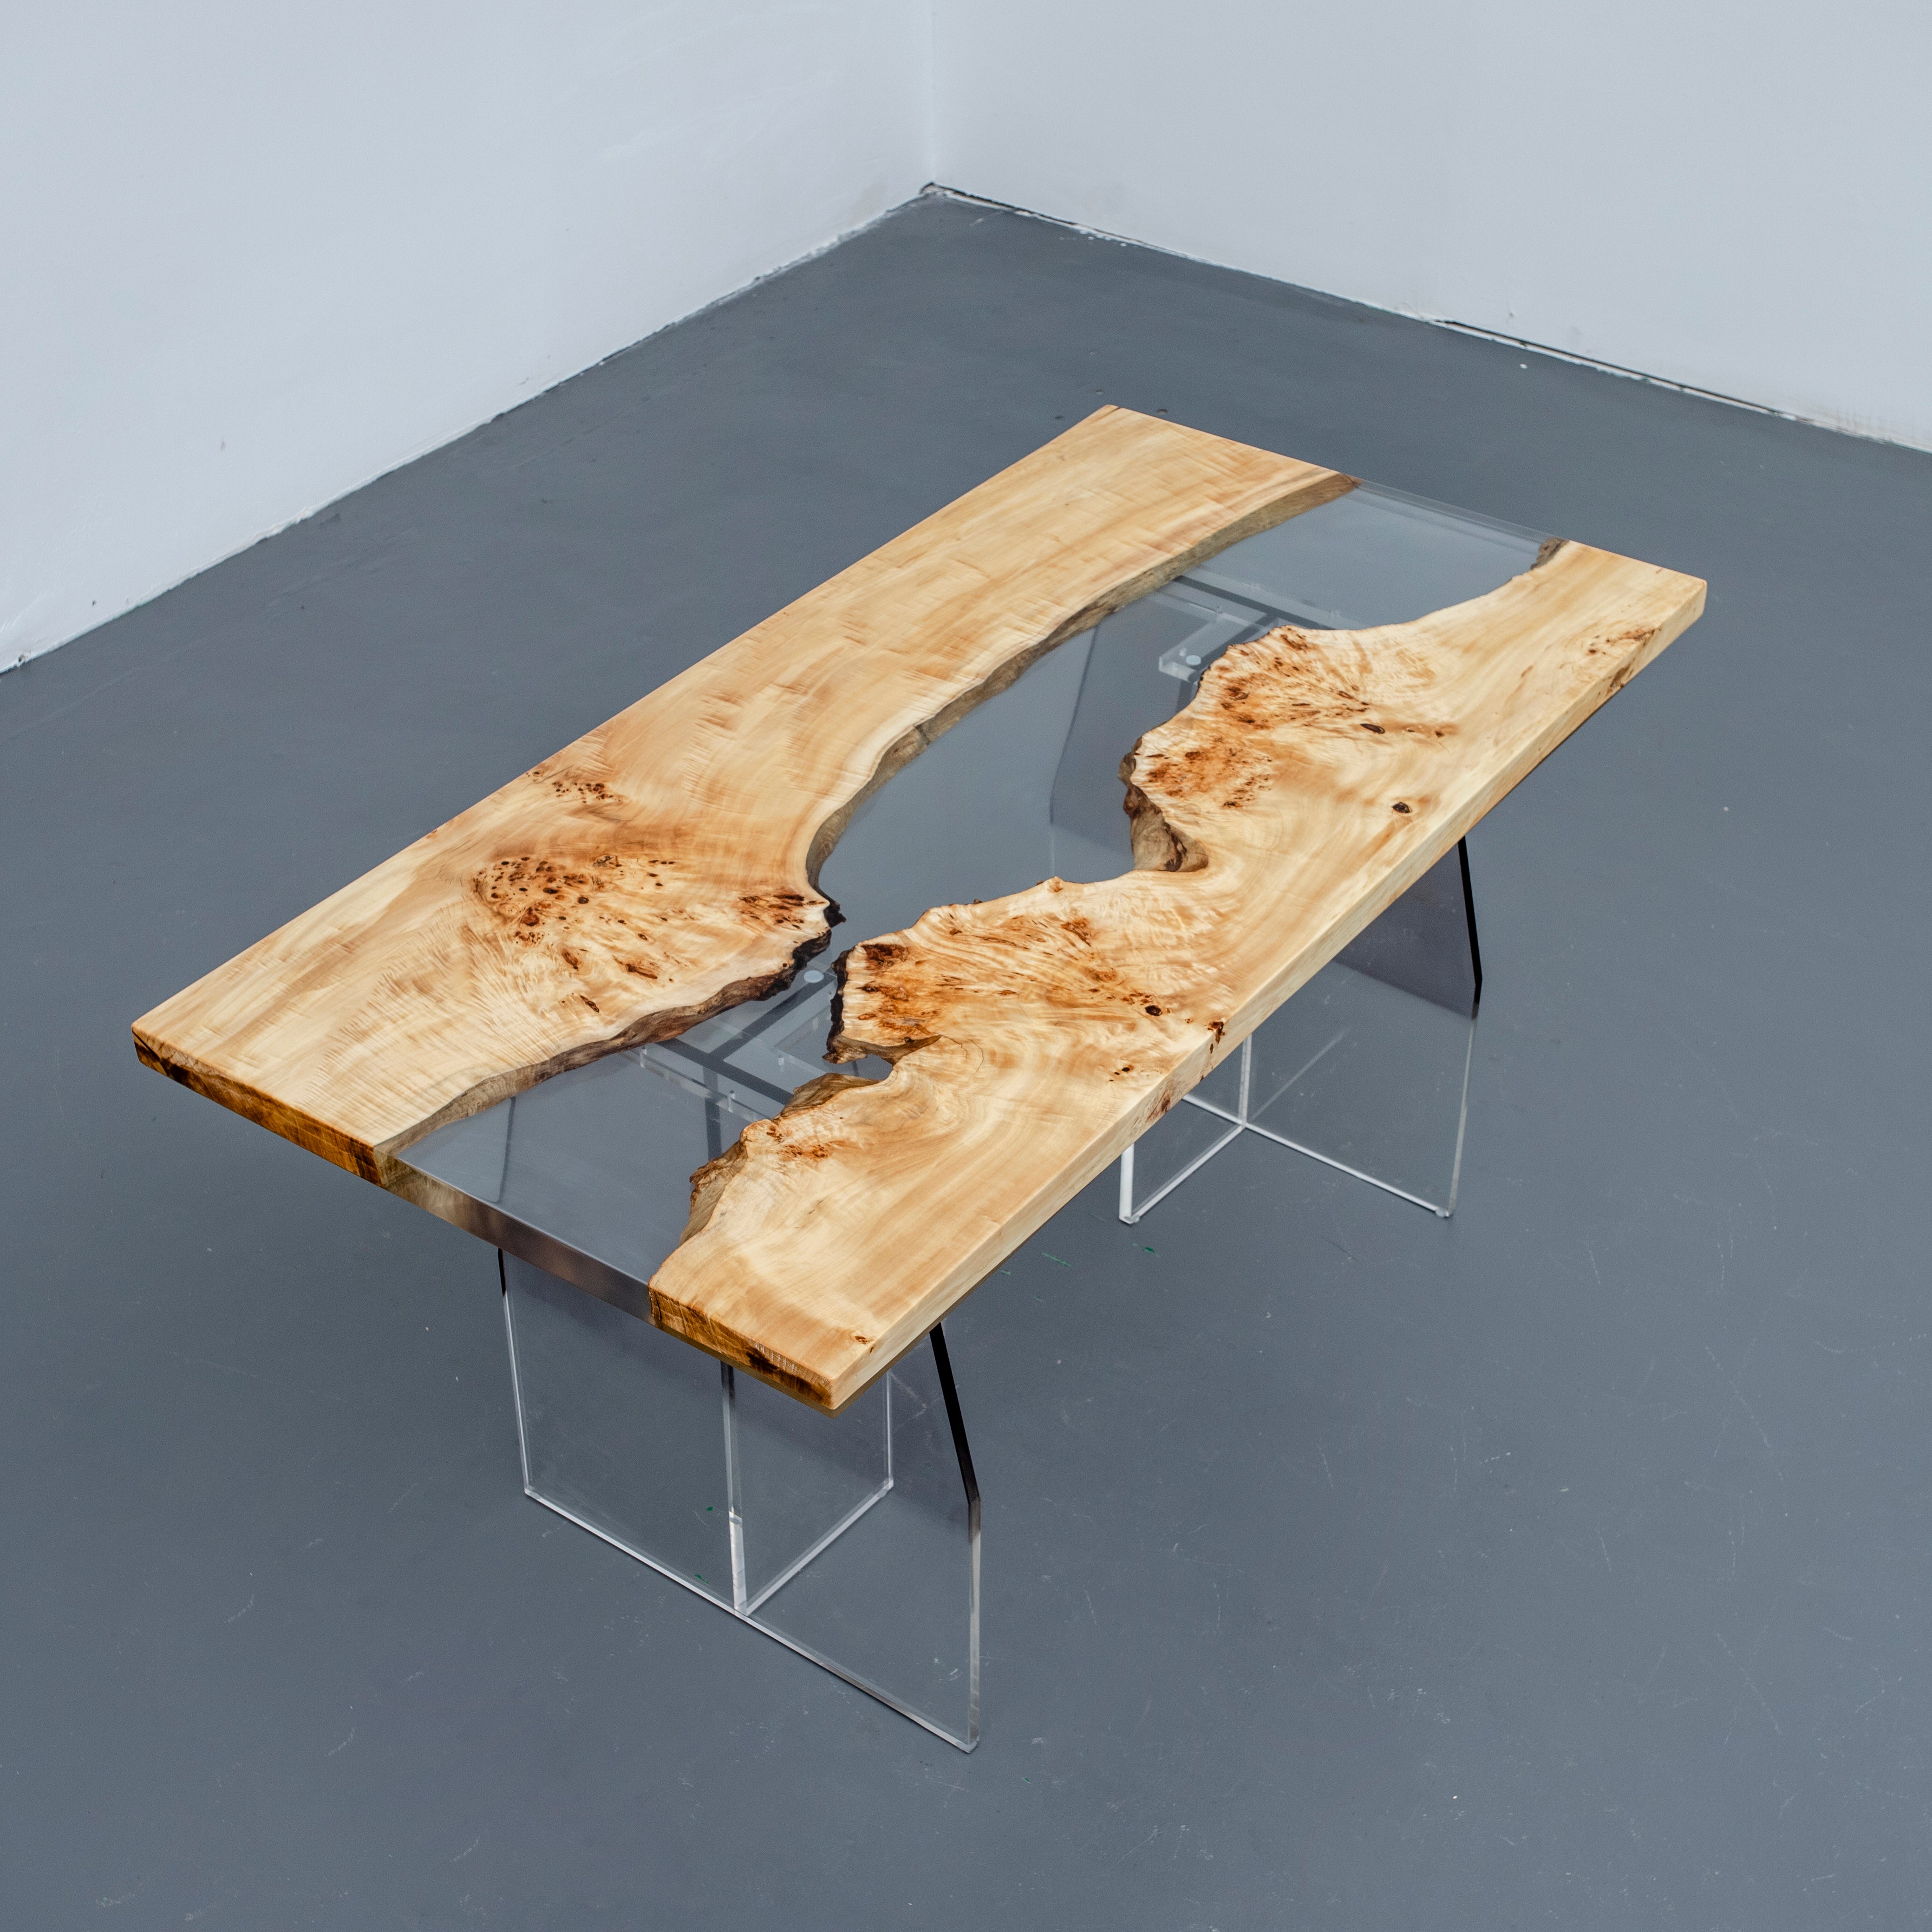 Epoxy Resin For Table Top, Epoxy Resin Live Edge Table, Epoxy Resin River Tables